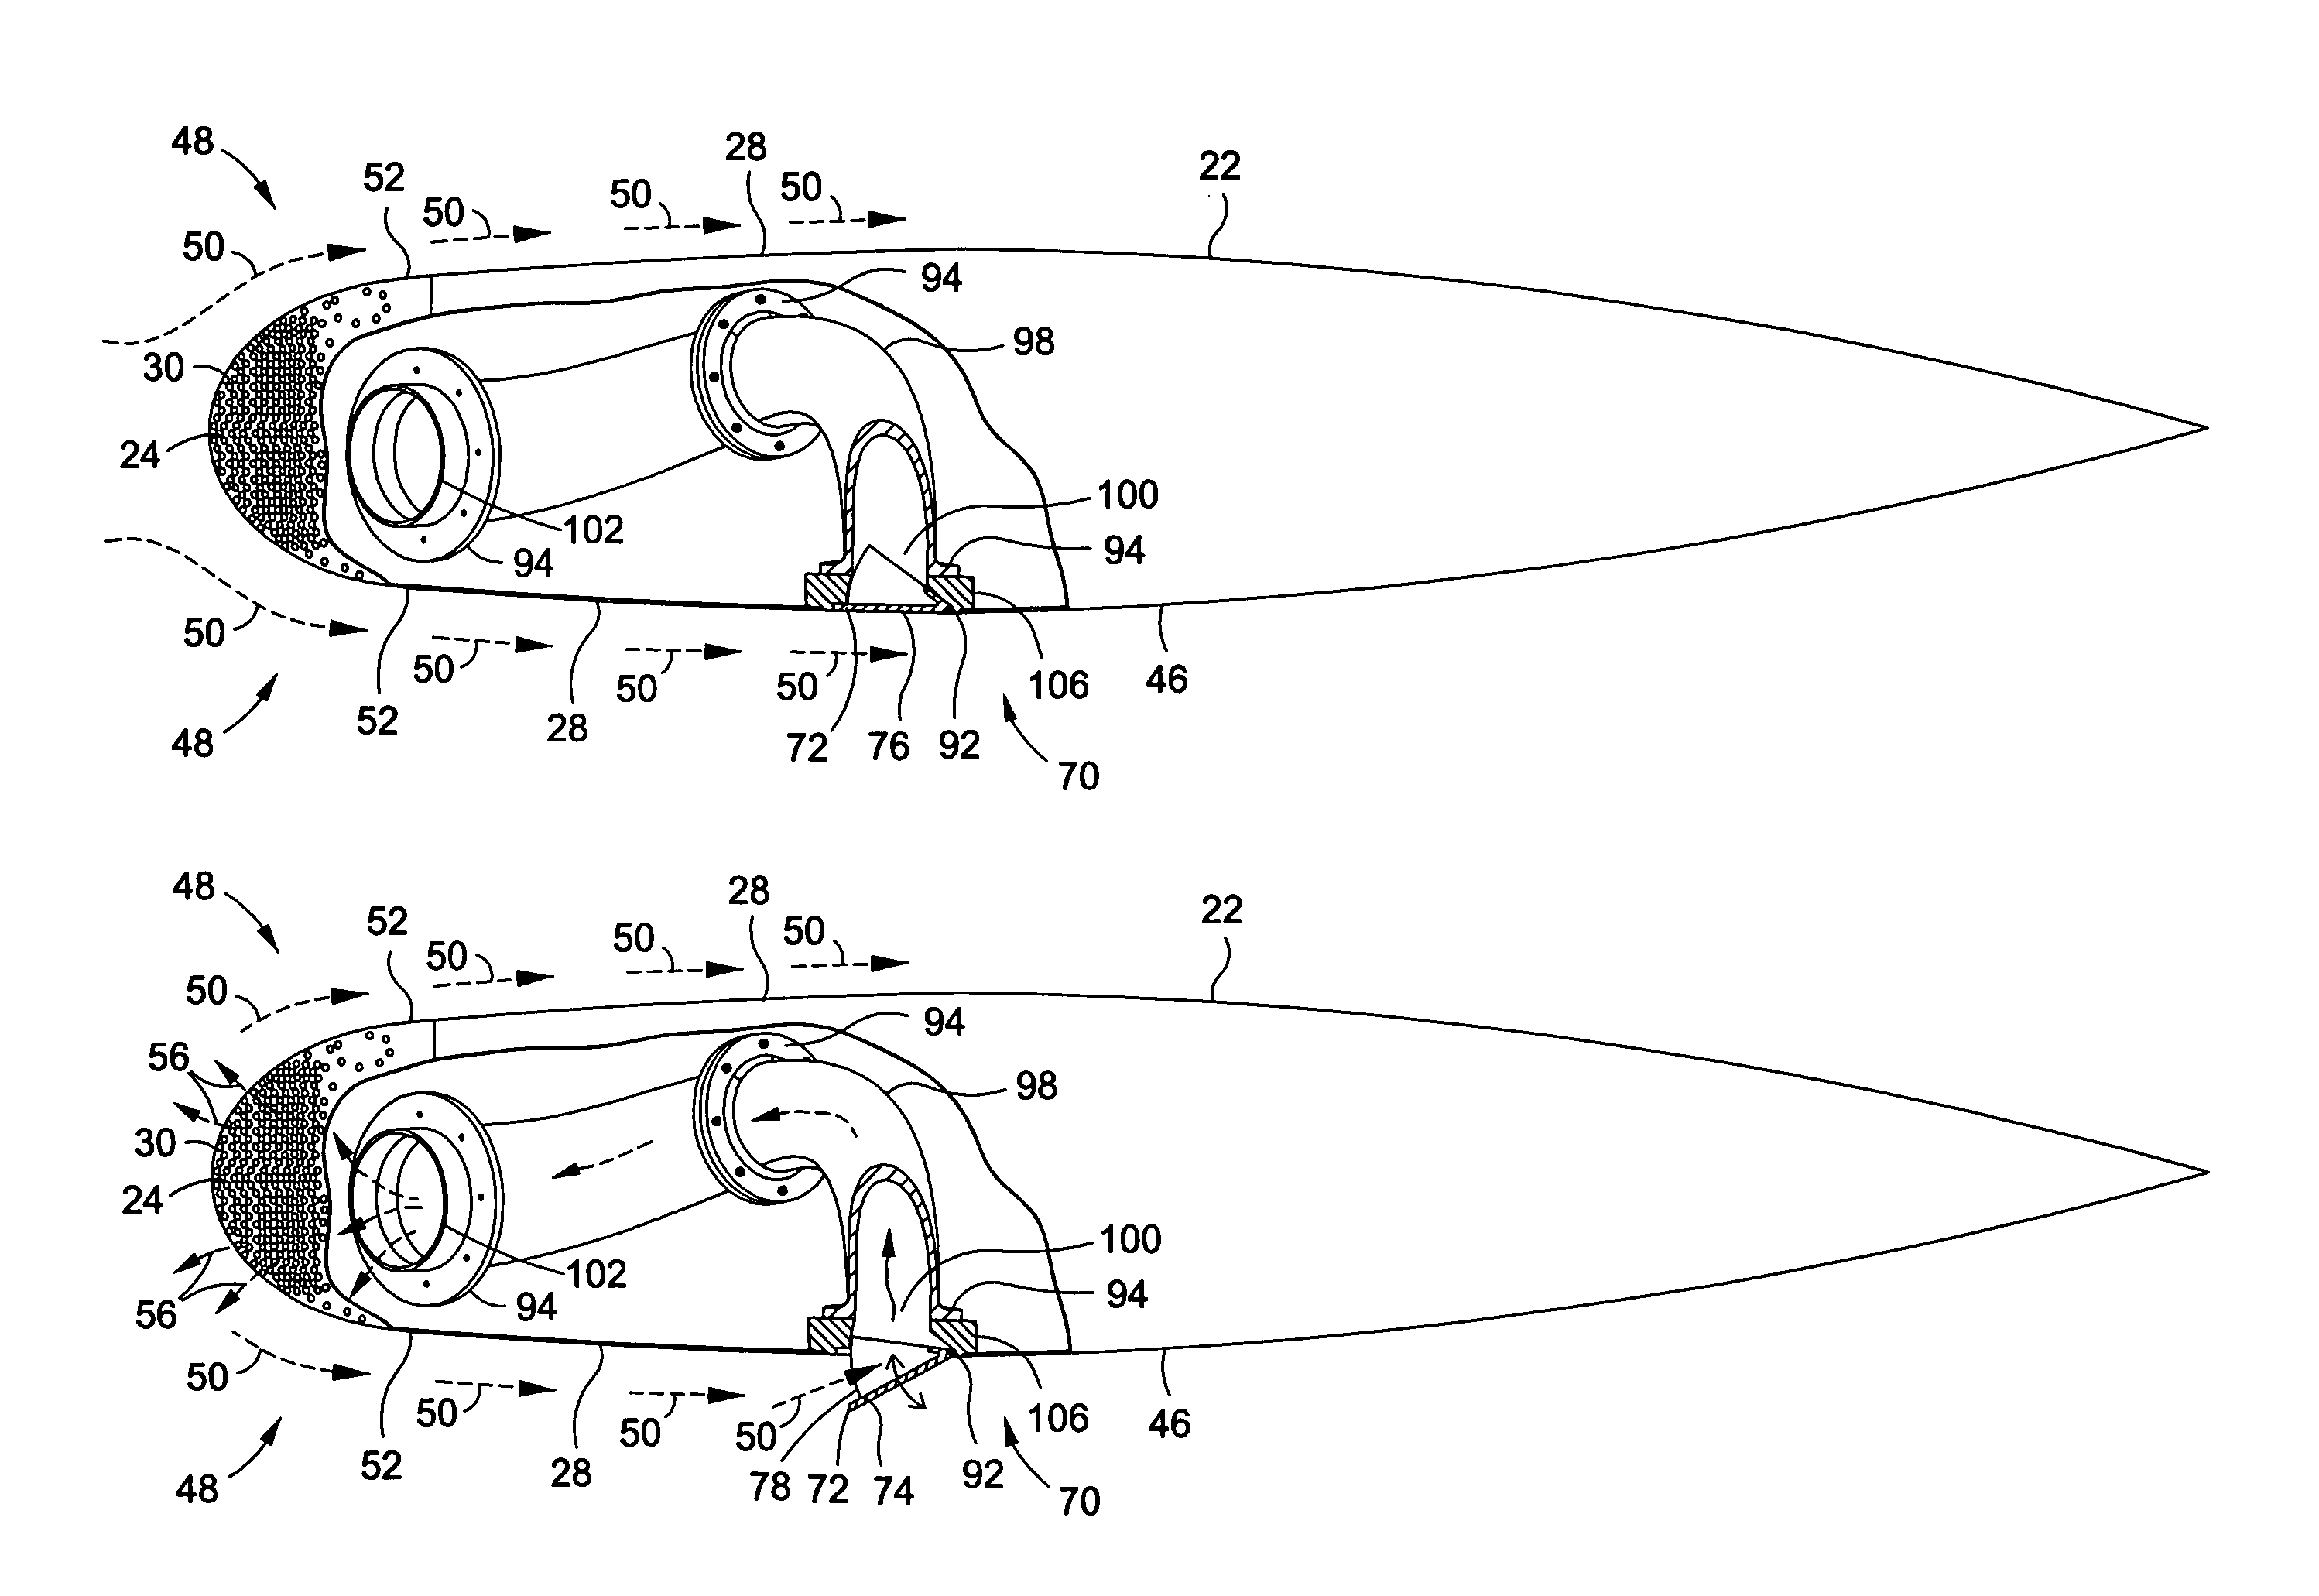 Apparatus and method for passive purging of micro-perforated aerodynamic surfaces